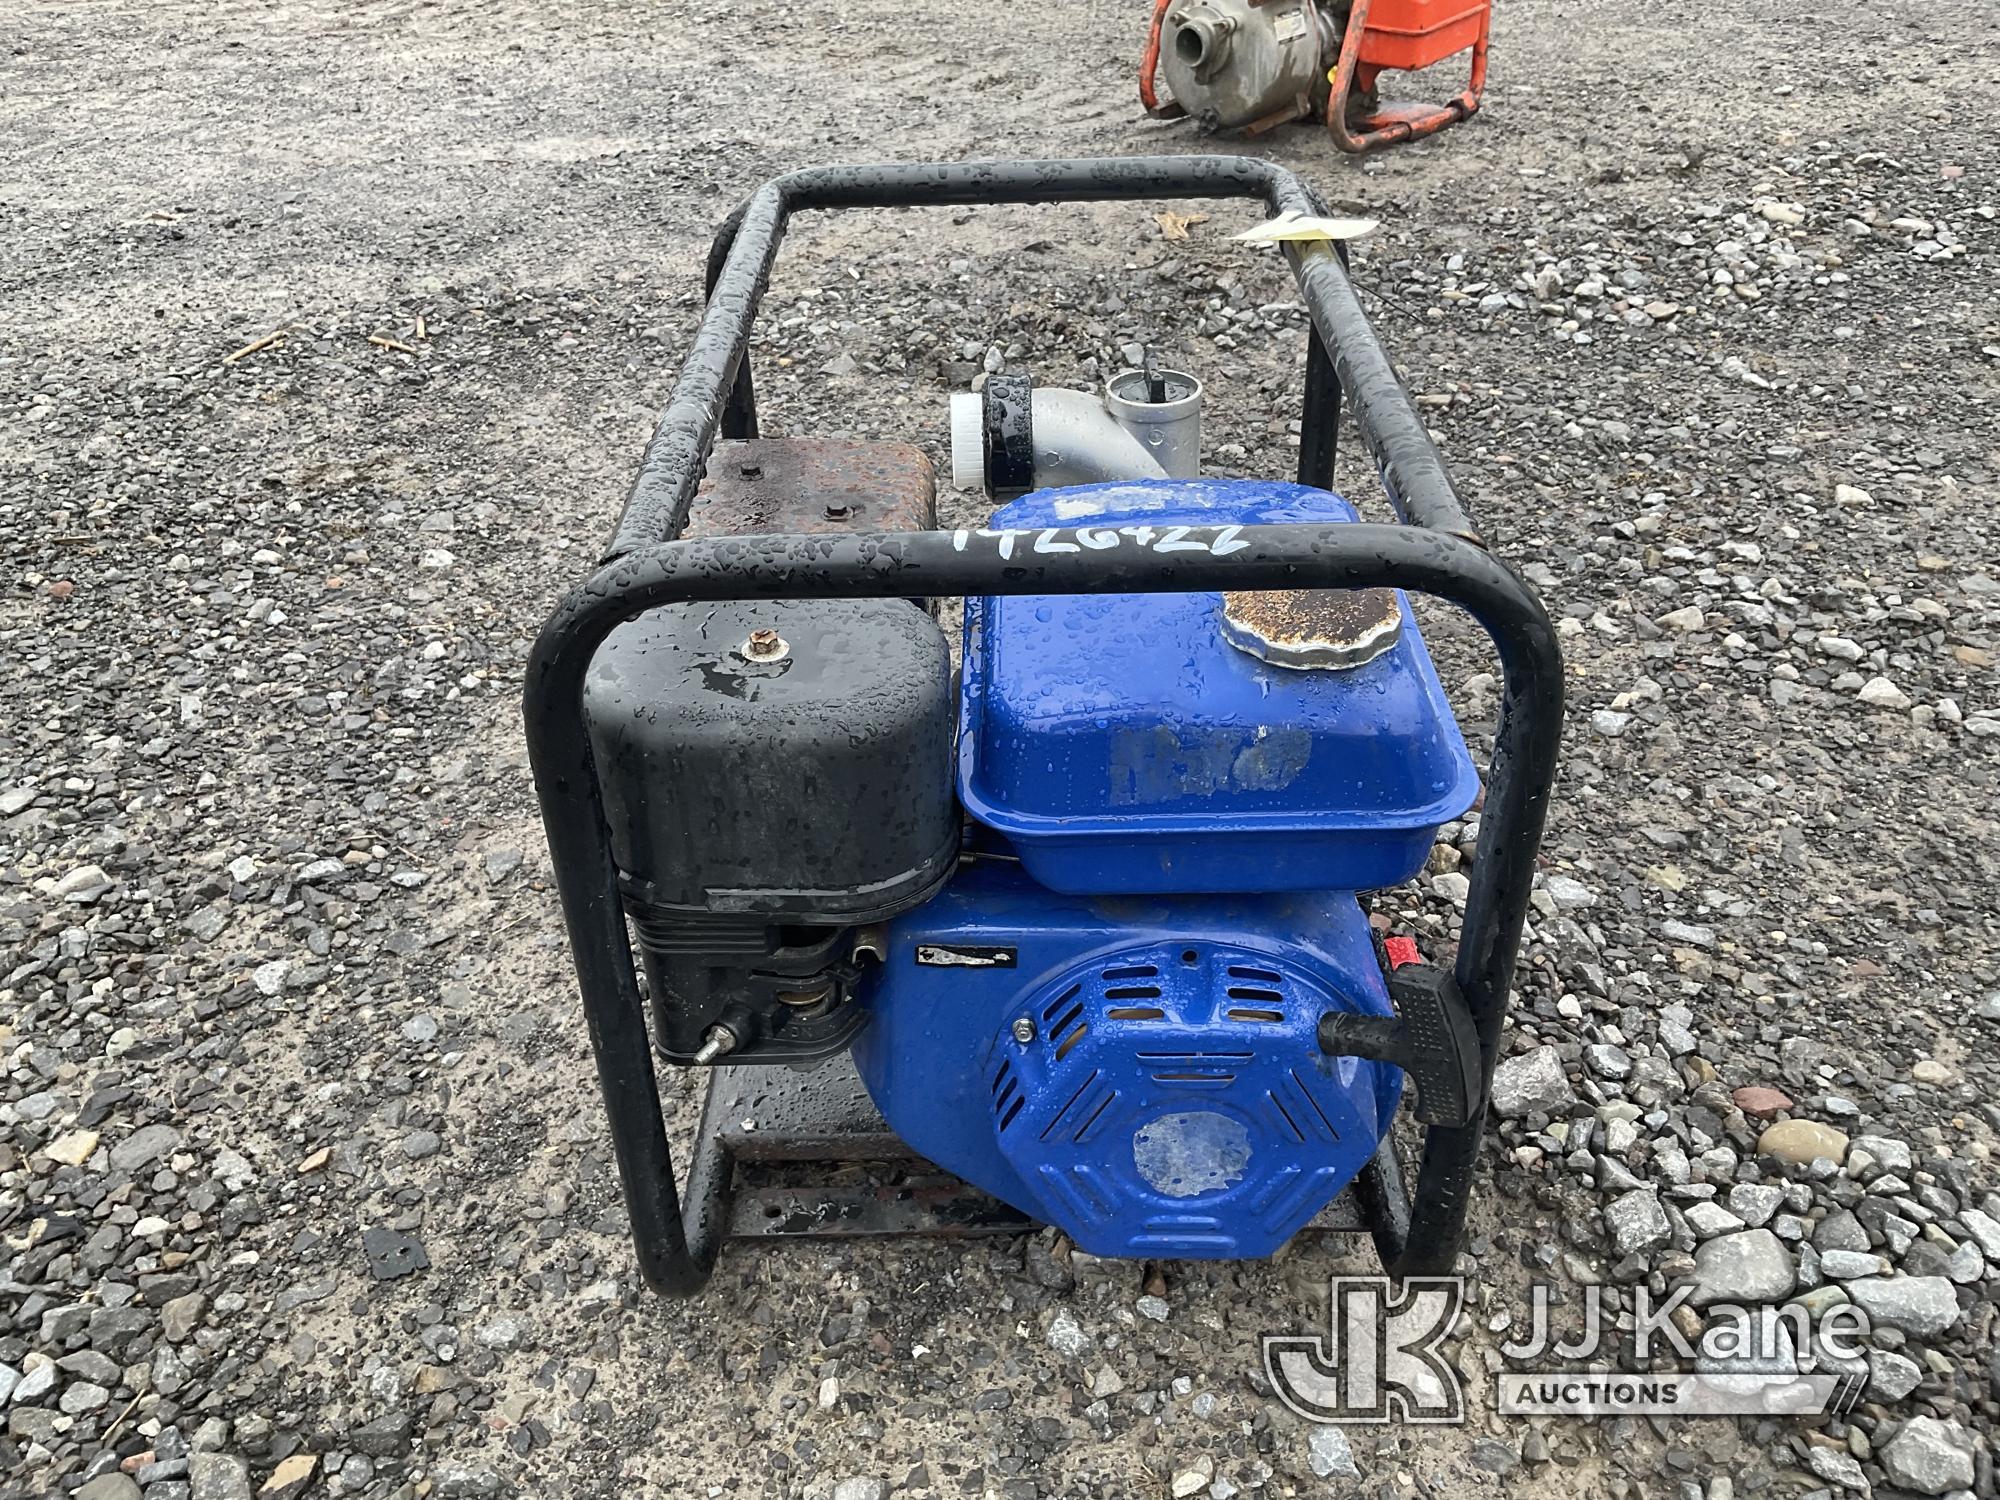 (Rome, NY) WP20 Water Pump Per seller: ran when taken from service